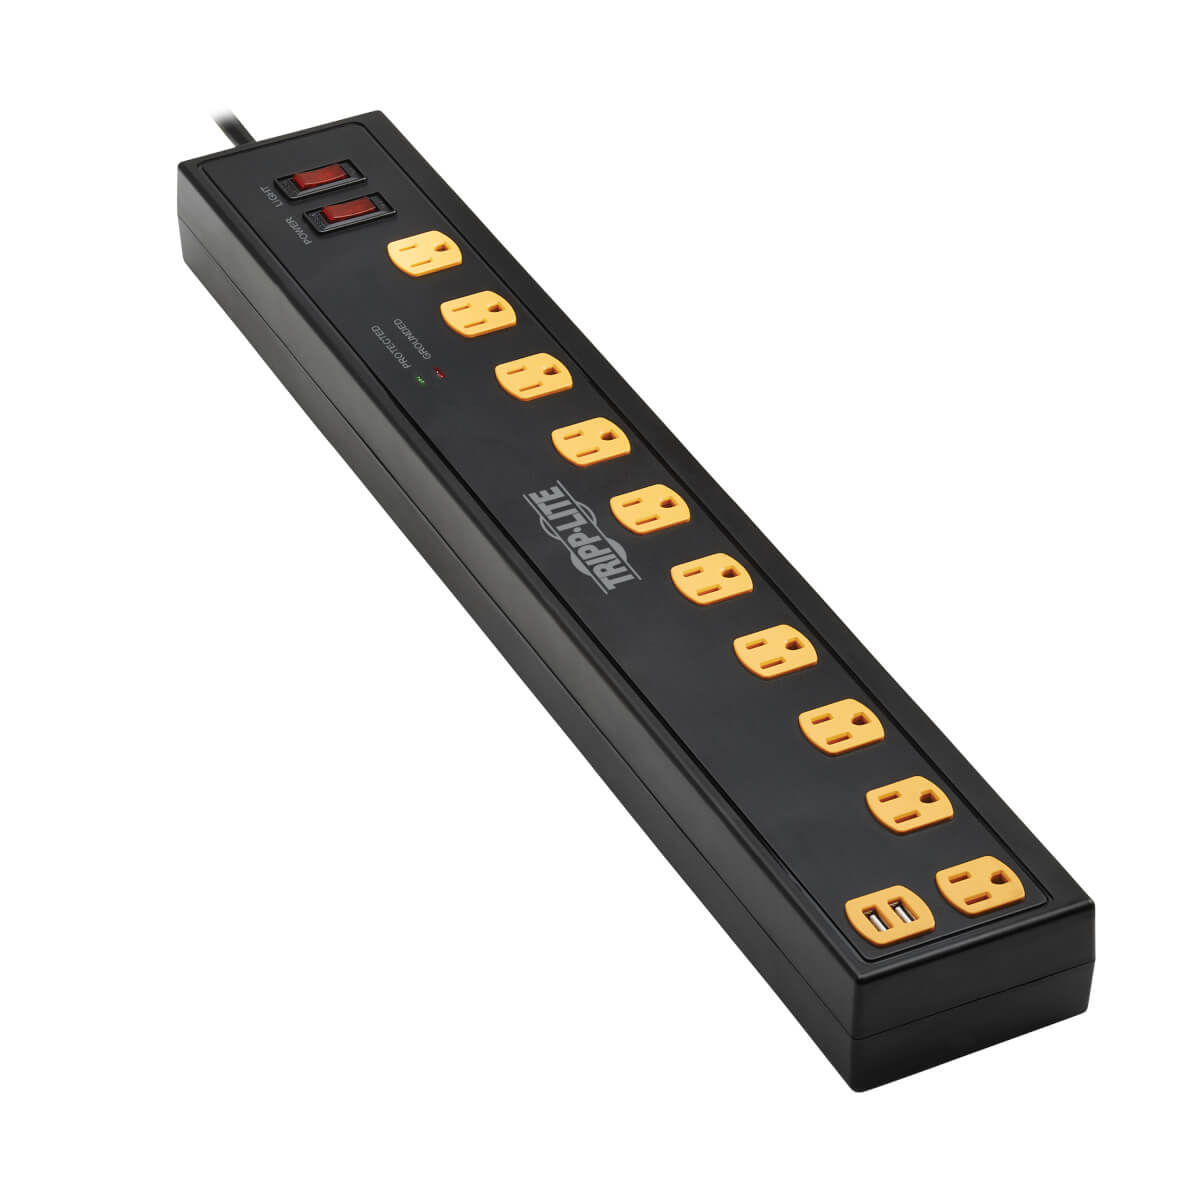 【TLP1010USB】PROTECT IT! 10-OUTLET SURGE PROT